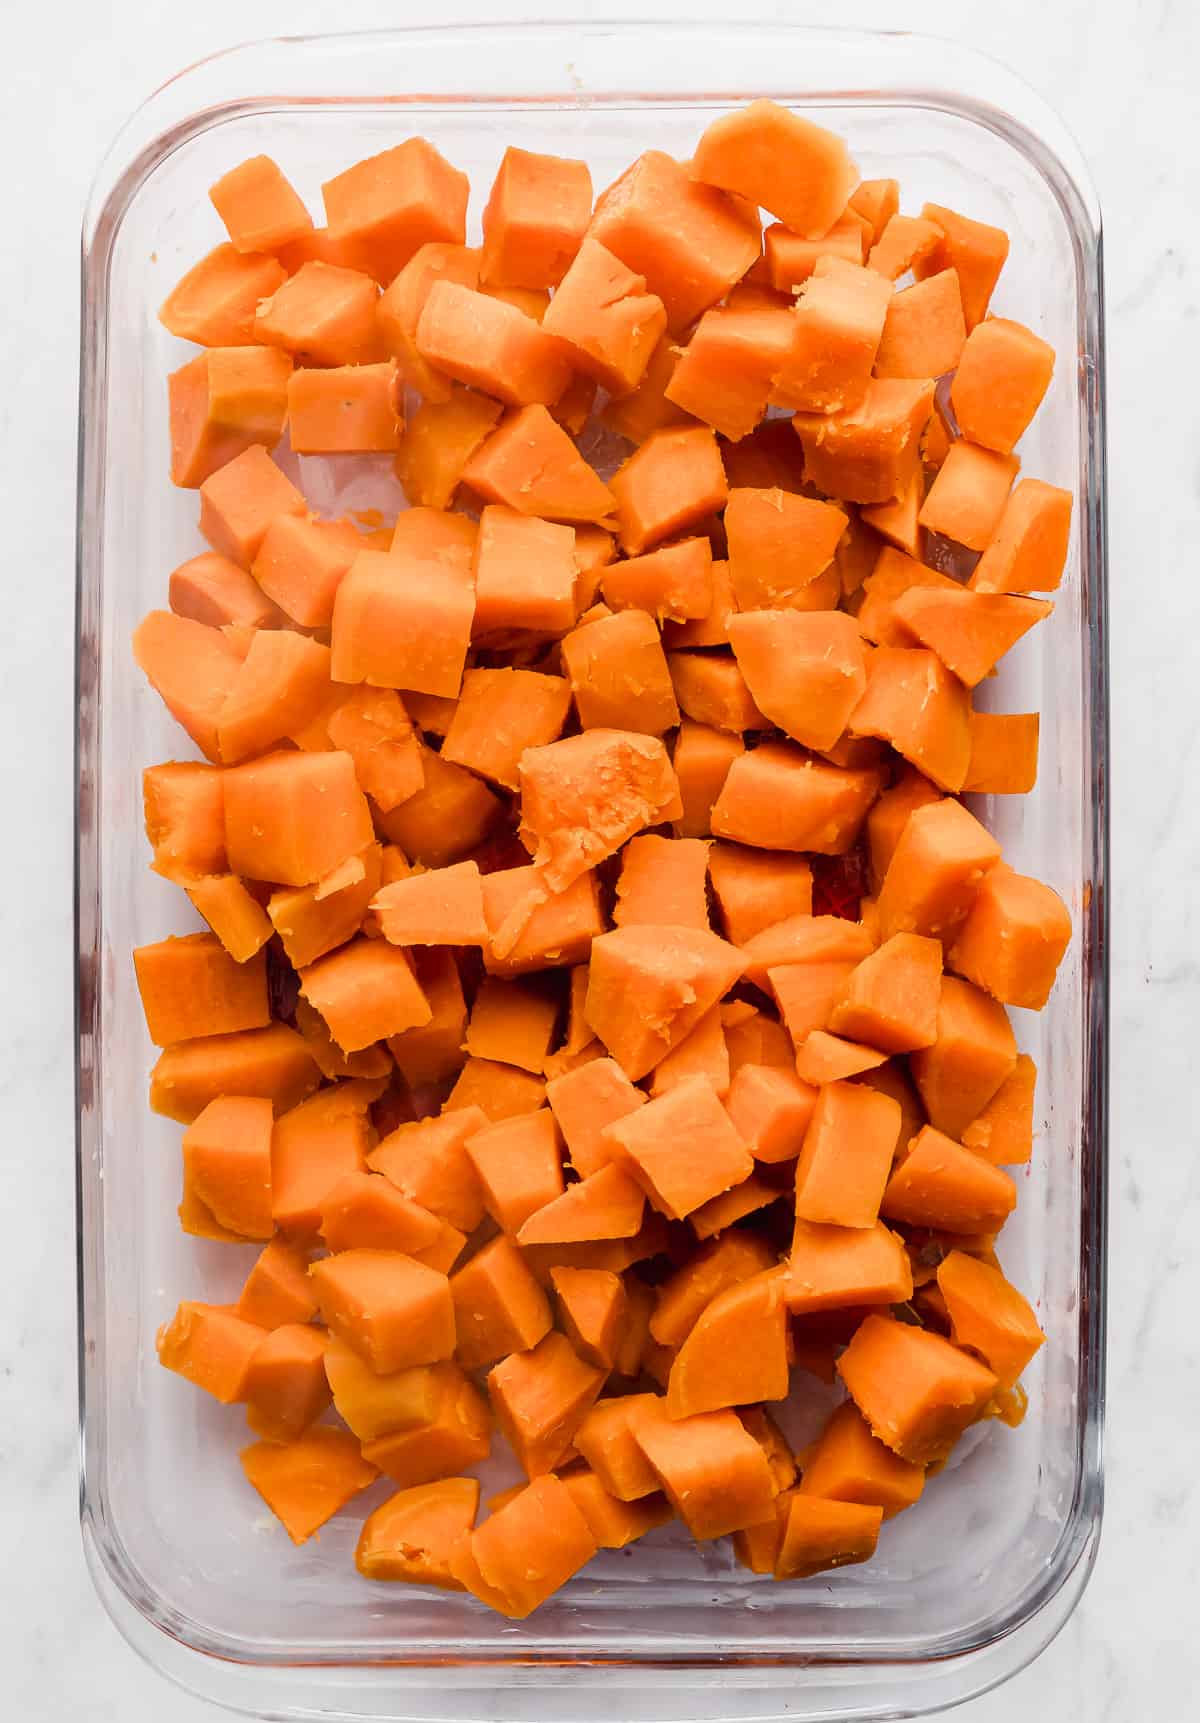 Cubed sweet potatoes in a glass casserole dish.